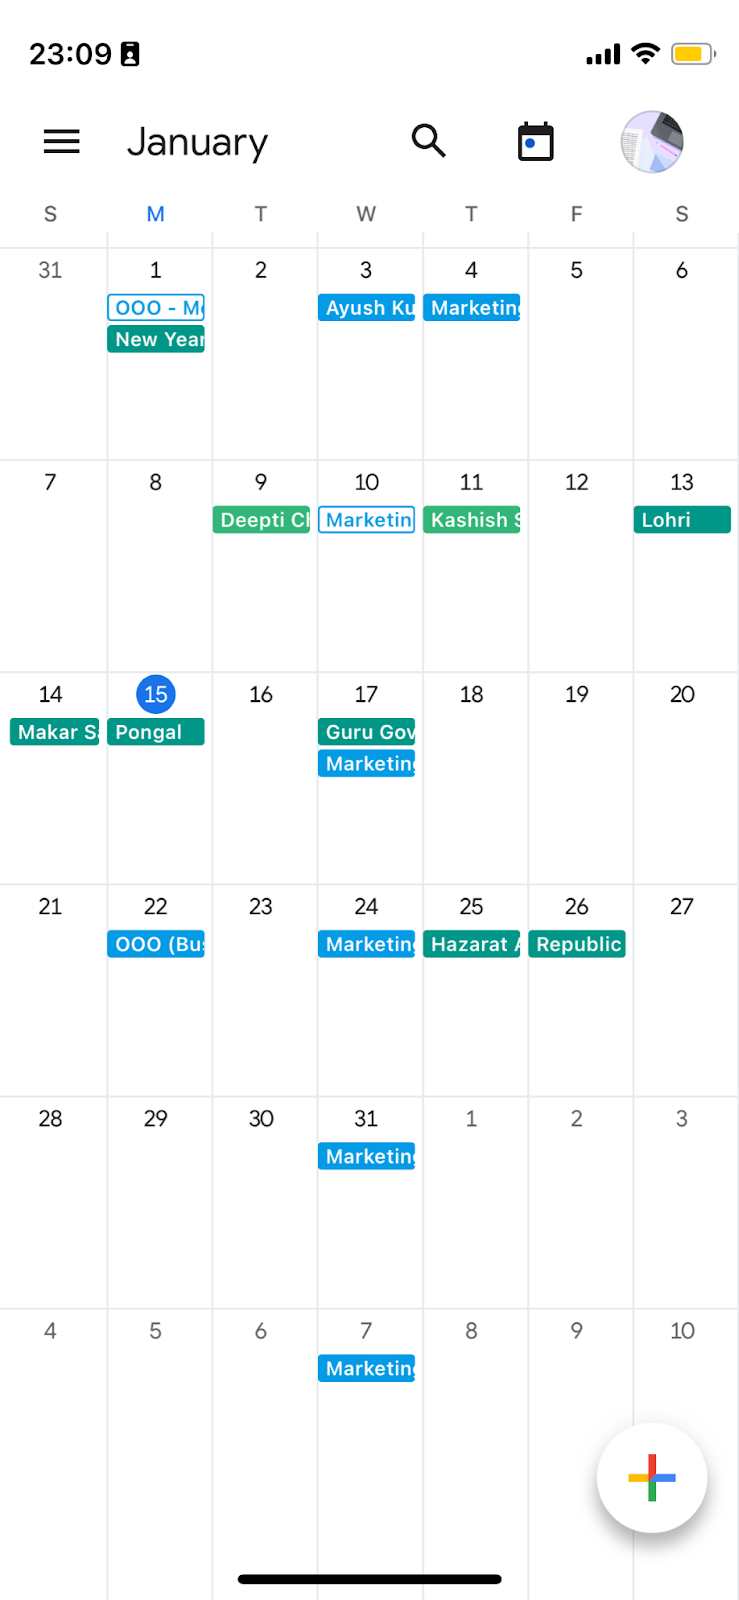 How to change the color scheme in Google Calendar - On iPhone